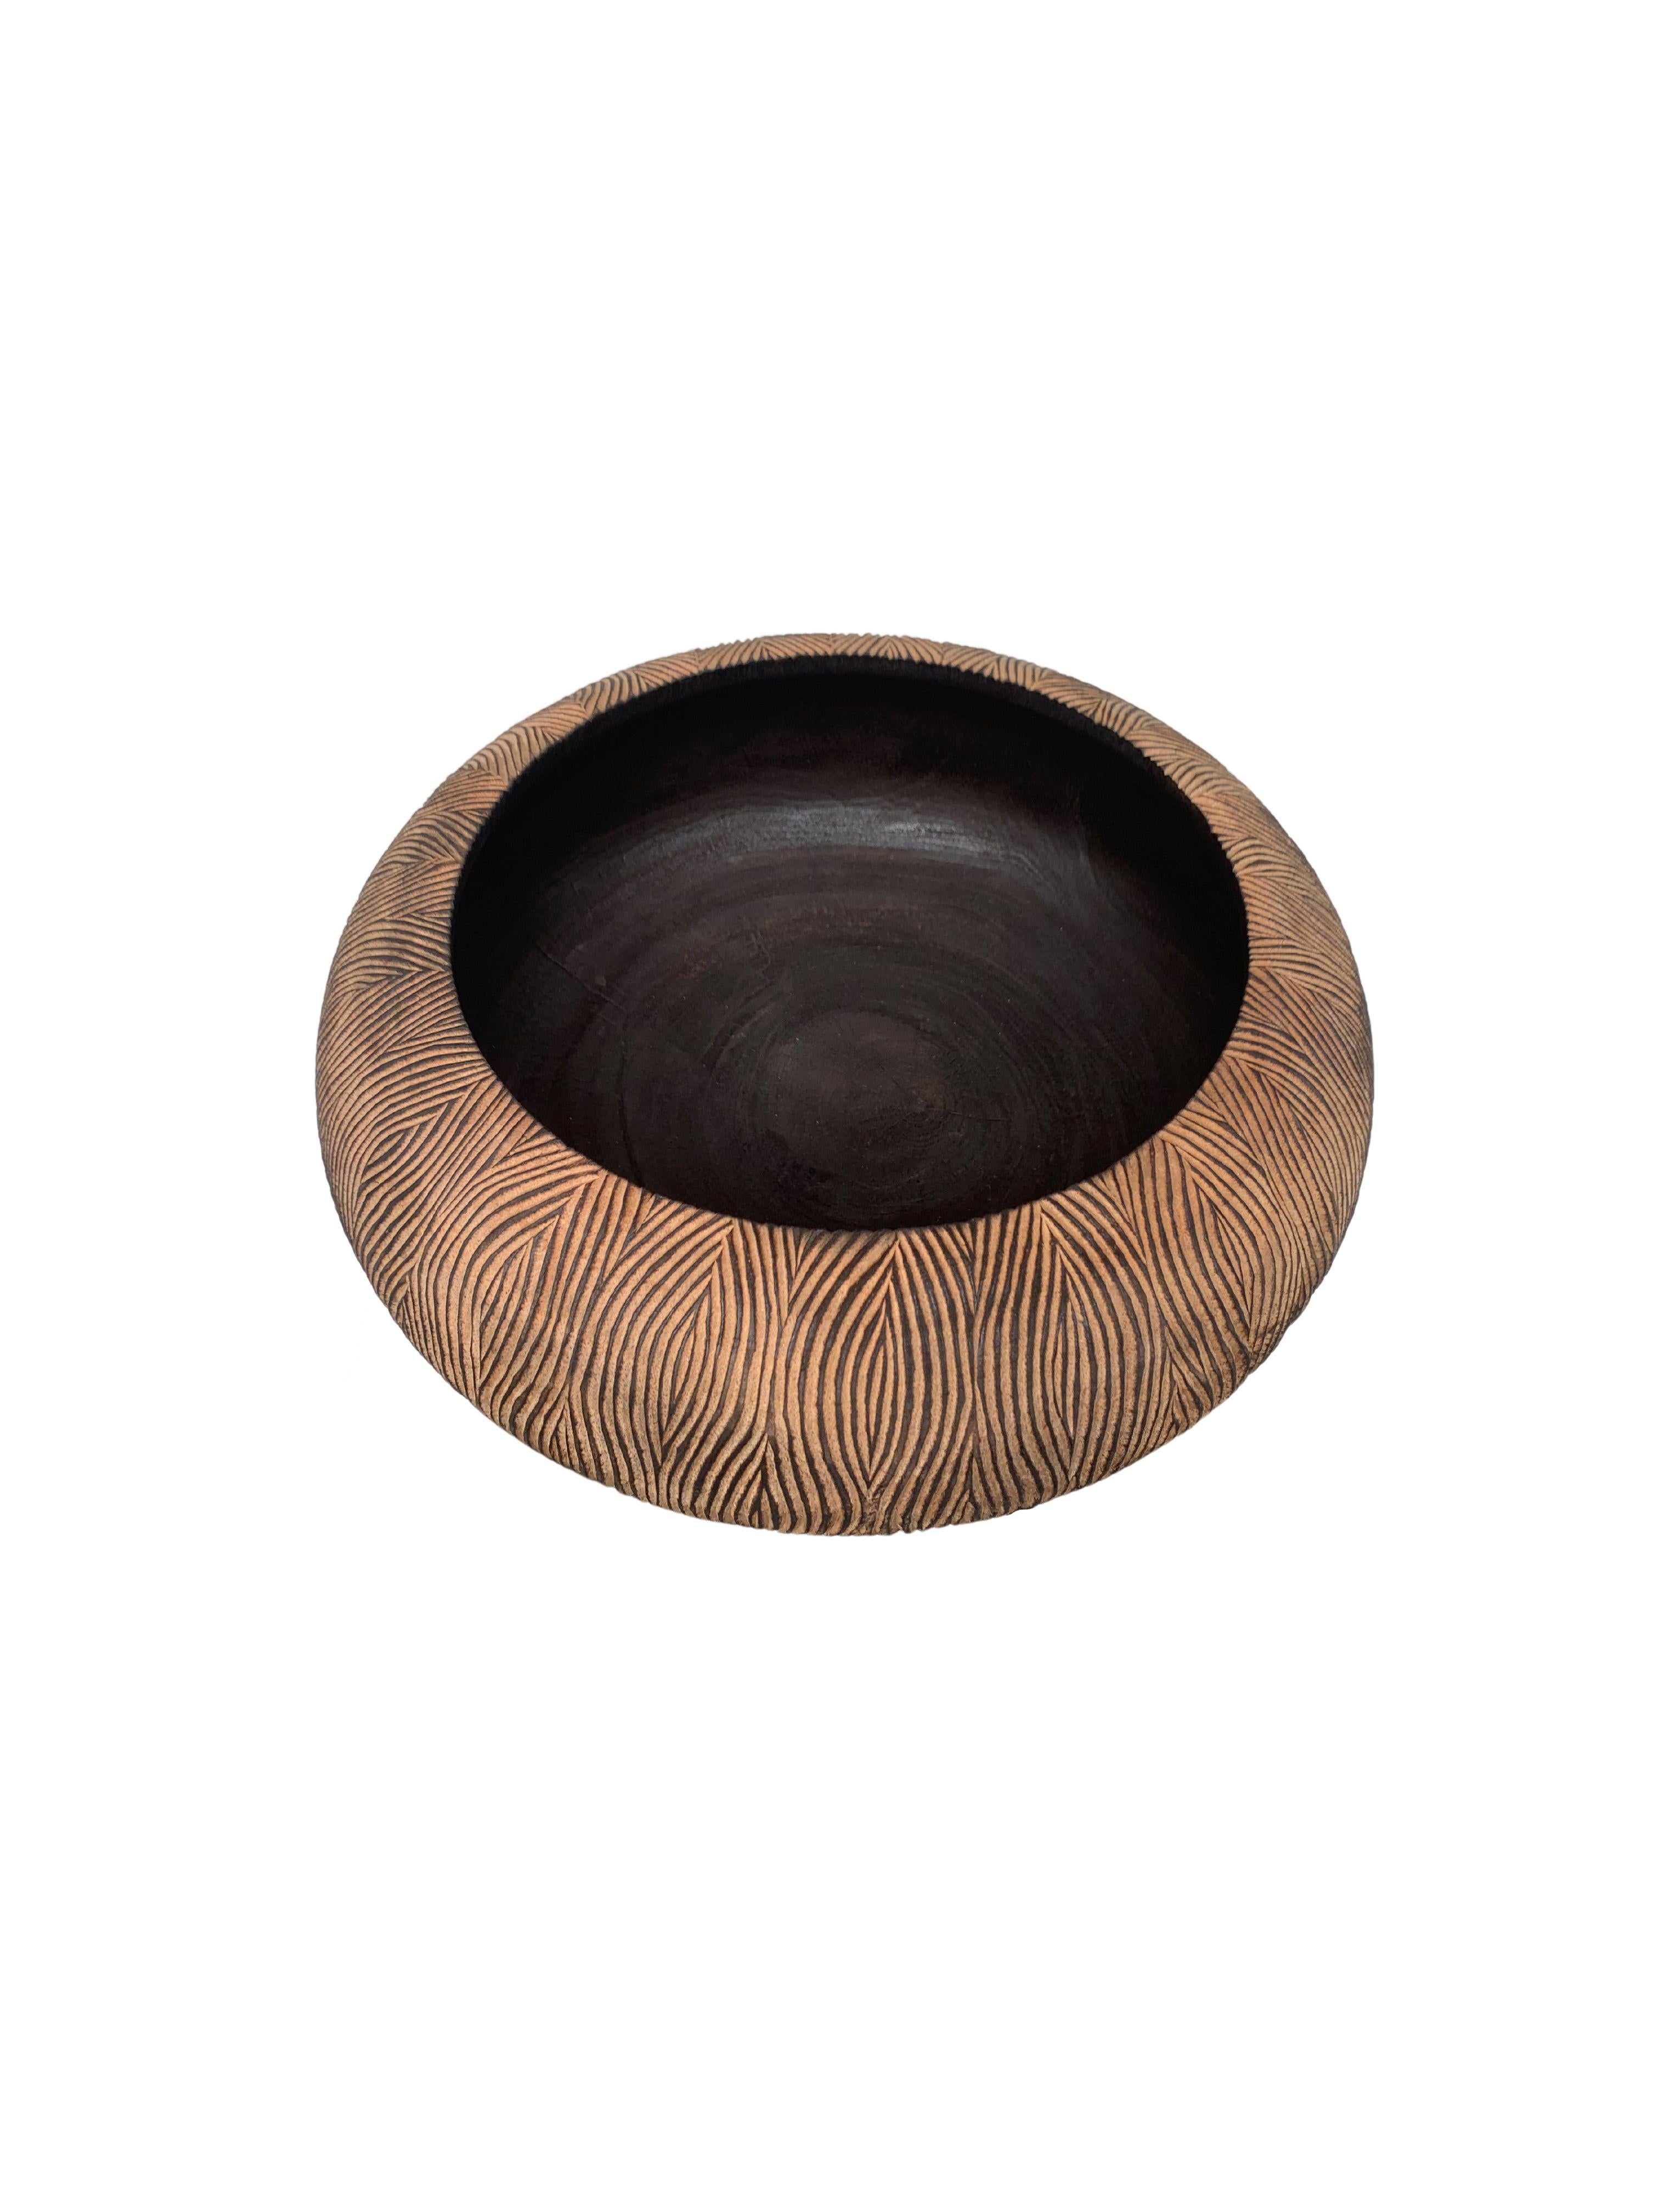 Organic Modern Solid Mango Wood Bowl with Carved Exterior & Burnt Finish For Sale